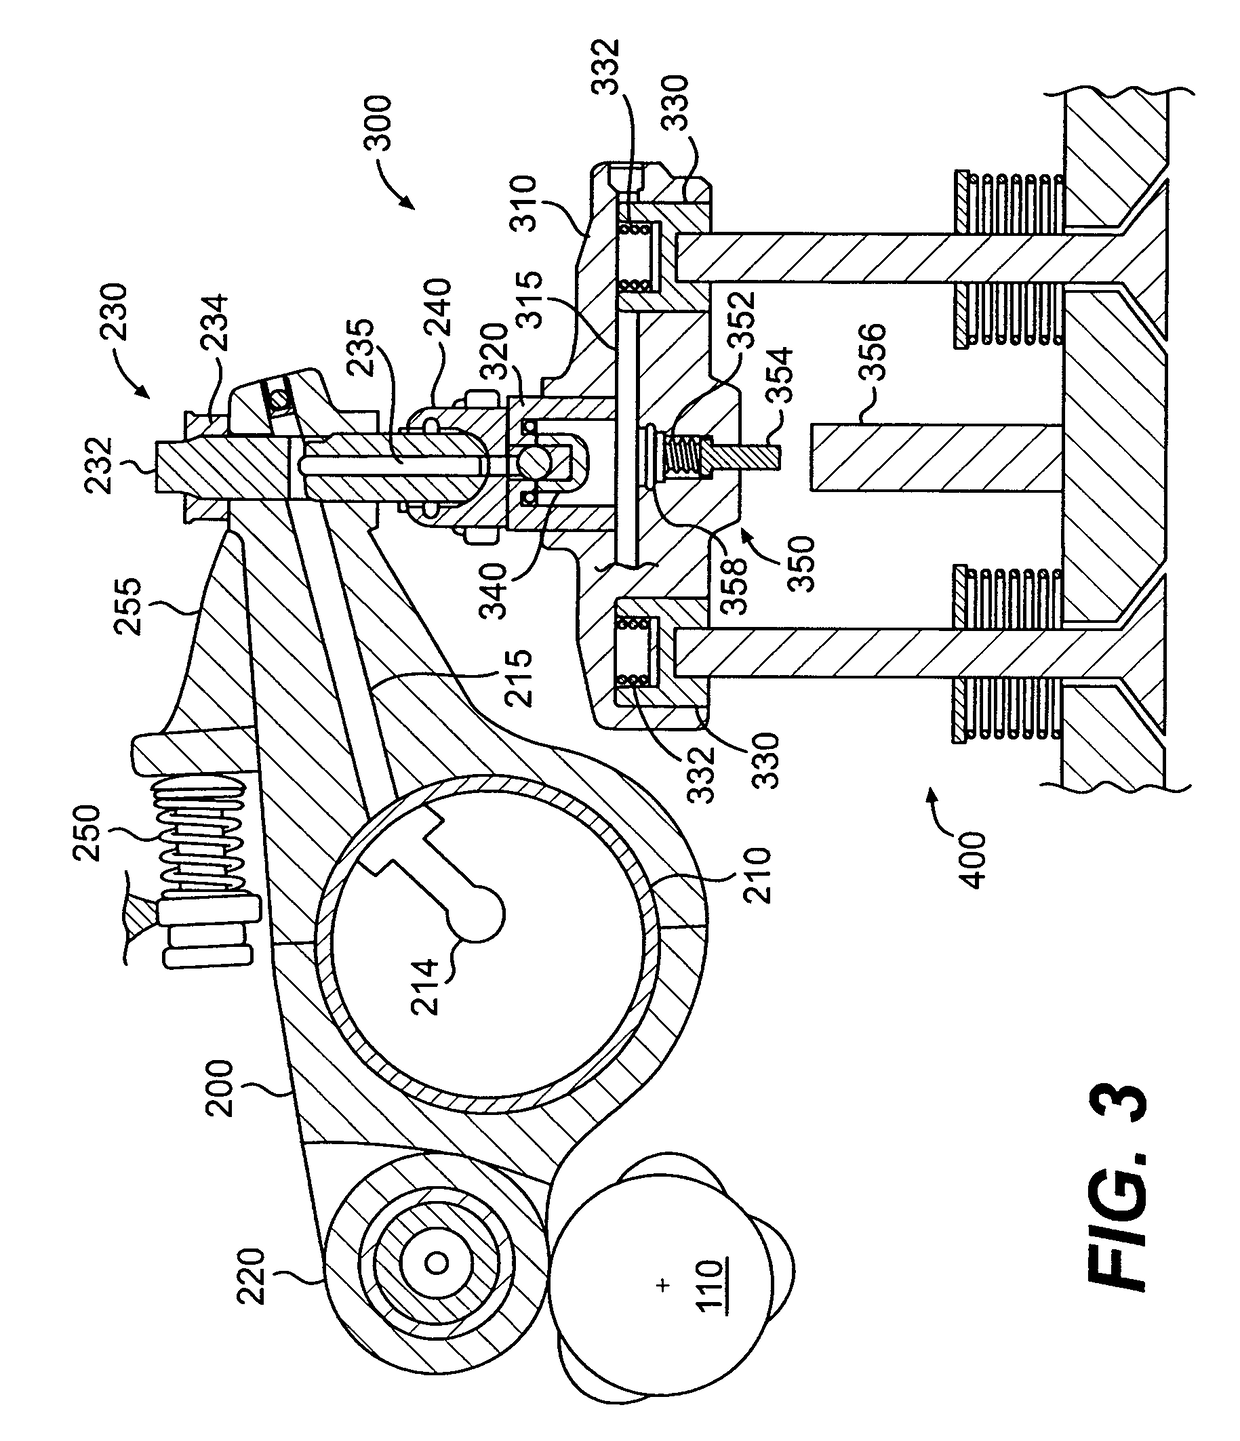 Valve bridge with integrated lost motion system